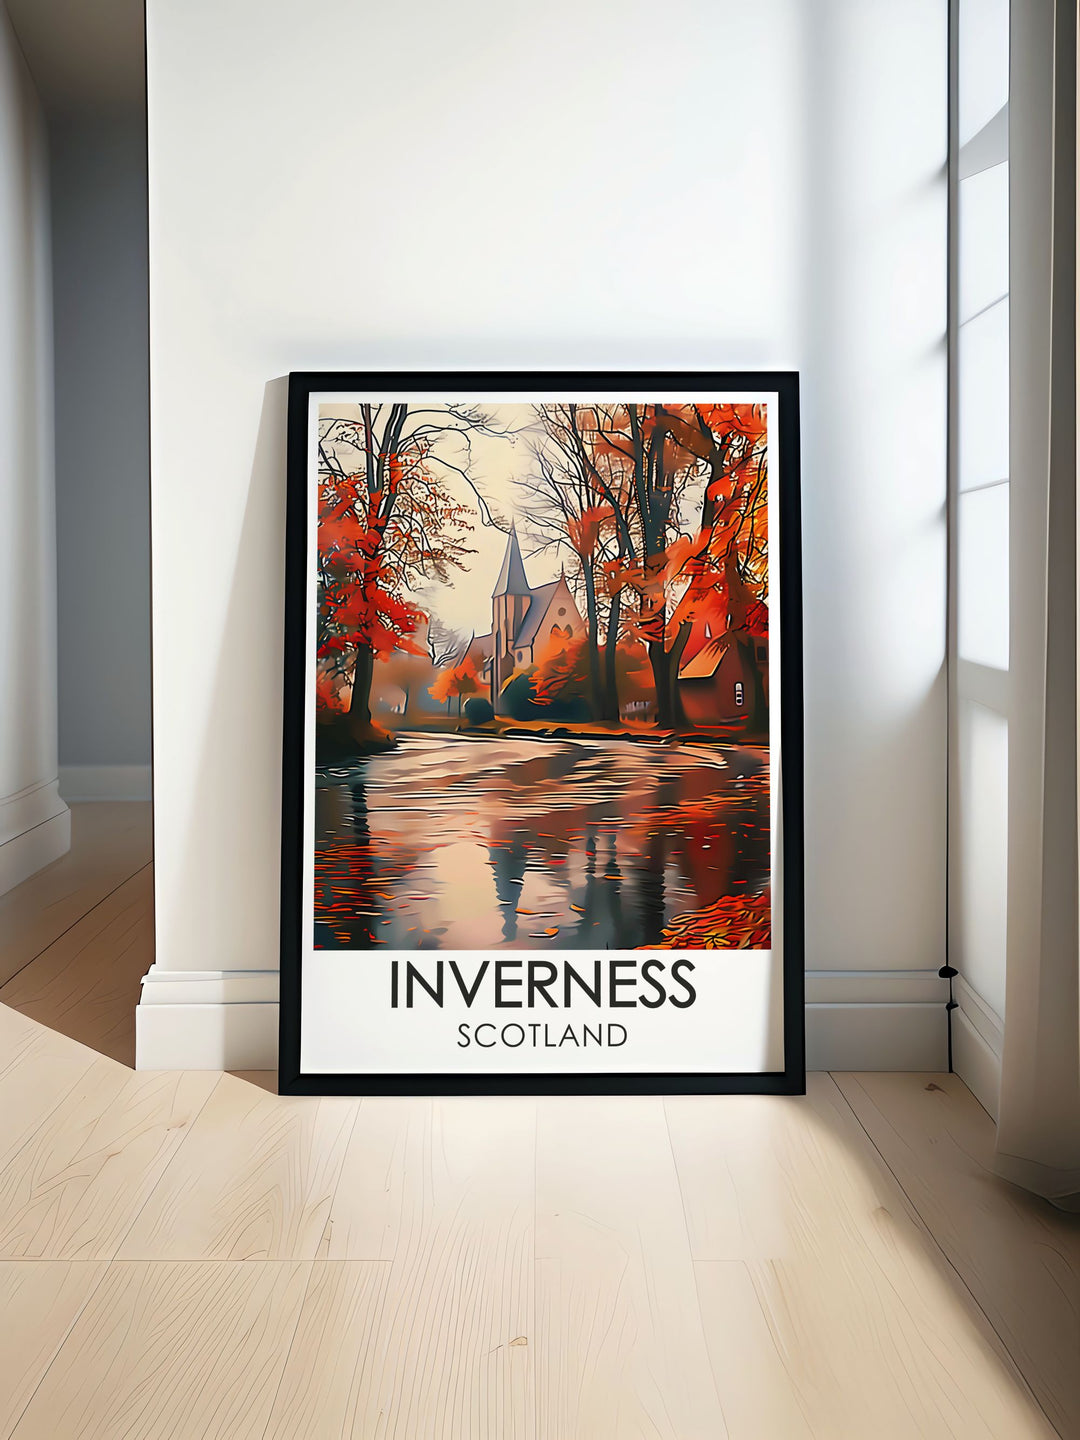 A travel poster showcasing the historical Inverness Castle with its stunning architecture and scenic surroundings, highlighting the charm of the Scottish Highlands.